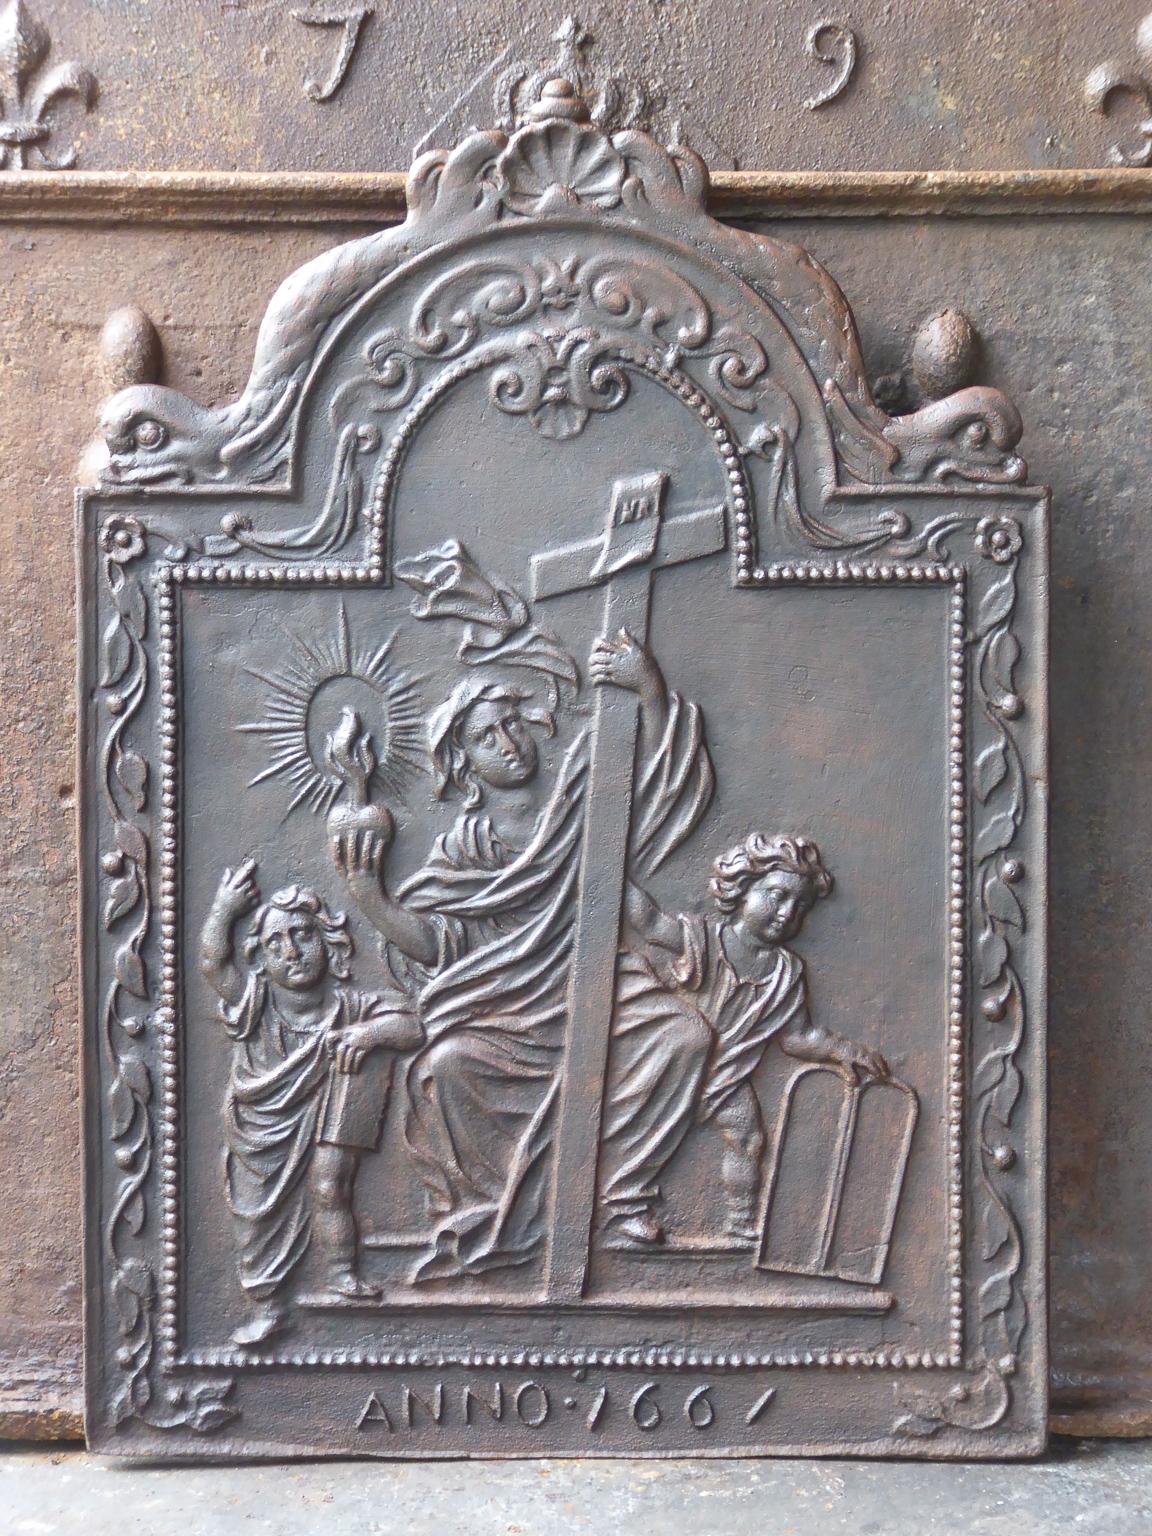 20th century French fireback with an allegory on Faith. Faith (from the triptych faith, hope and love, the three theological virtues). The fireback is made of cast iron and has a natural brown patina. Upon request it can be made black / pewter. It